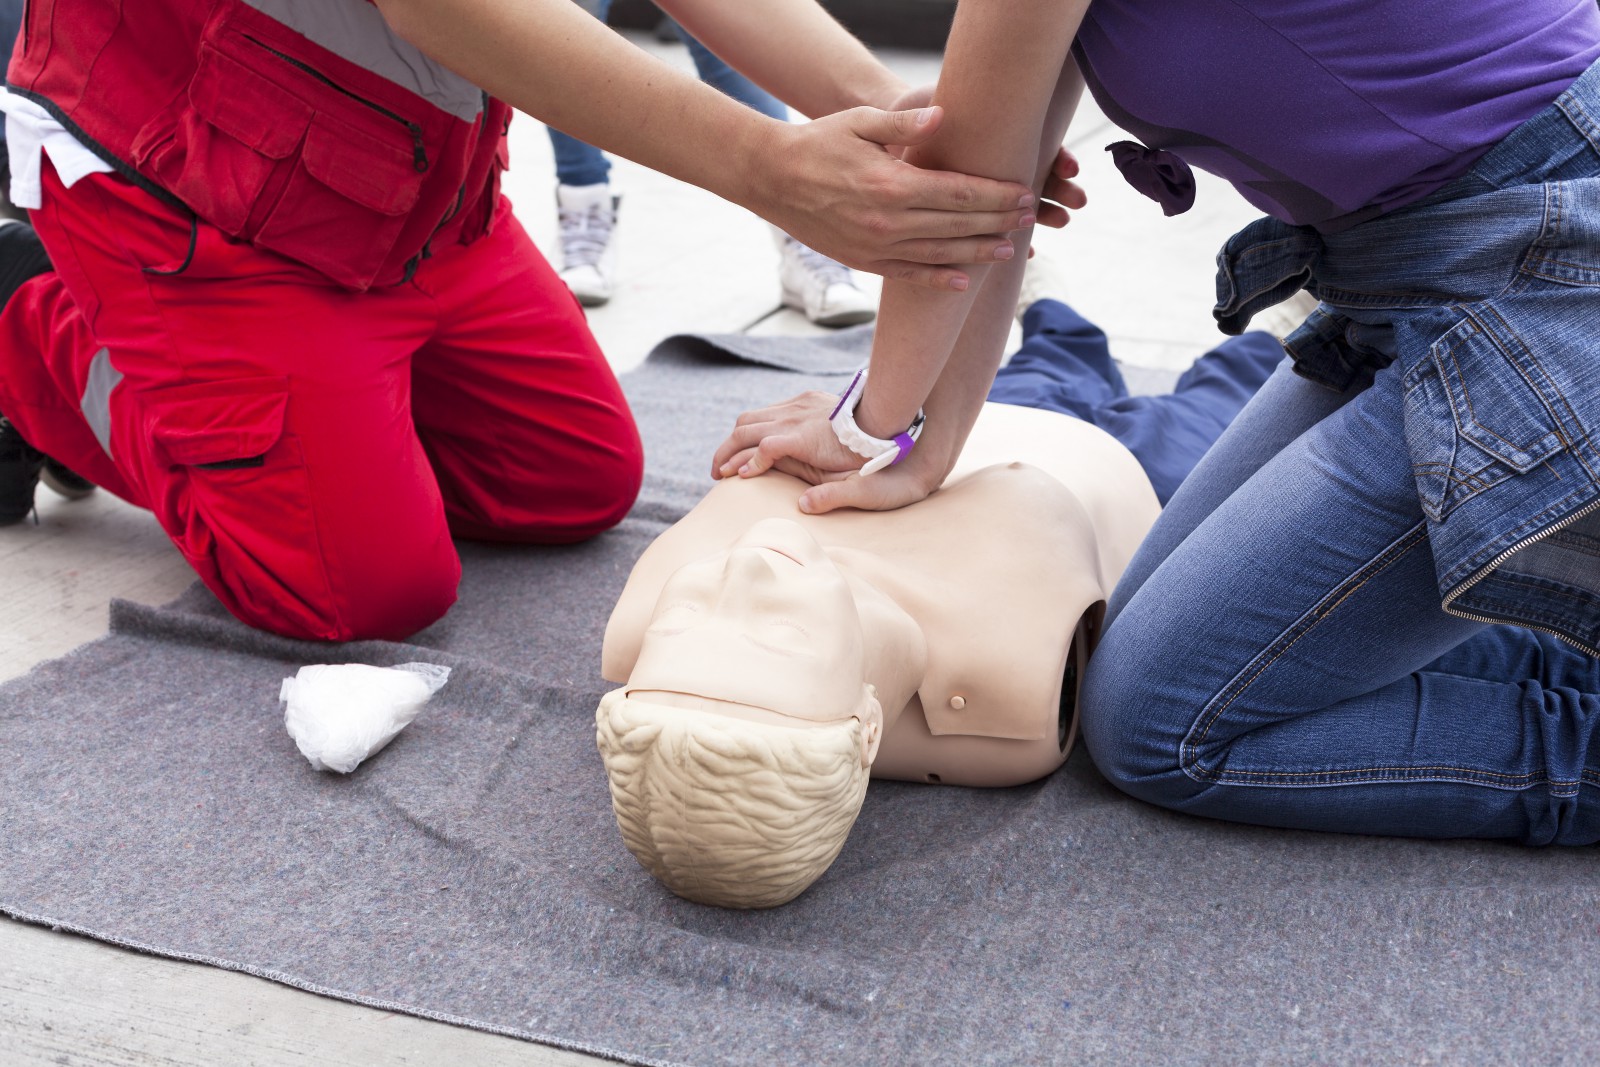 Standard First Aid & CPR/AED Course & Recertification